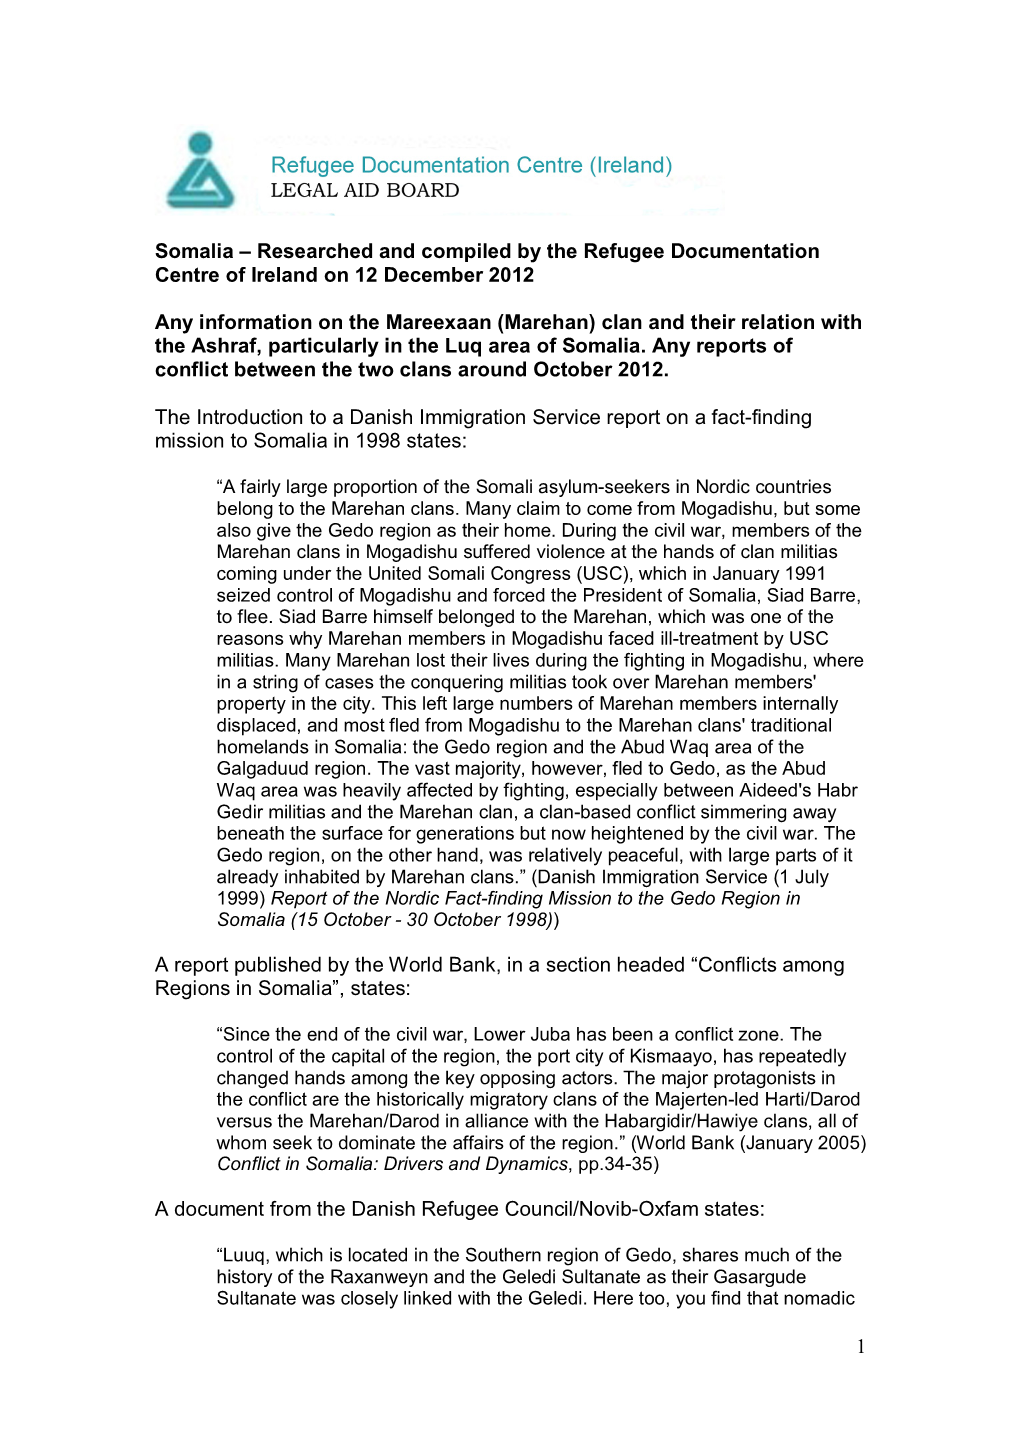 1 Somalia – Researched and Compiled by the Refugee